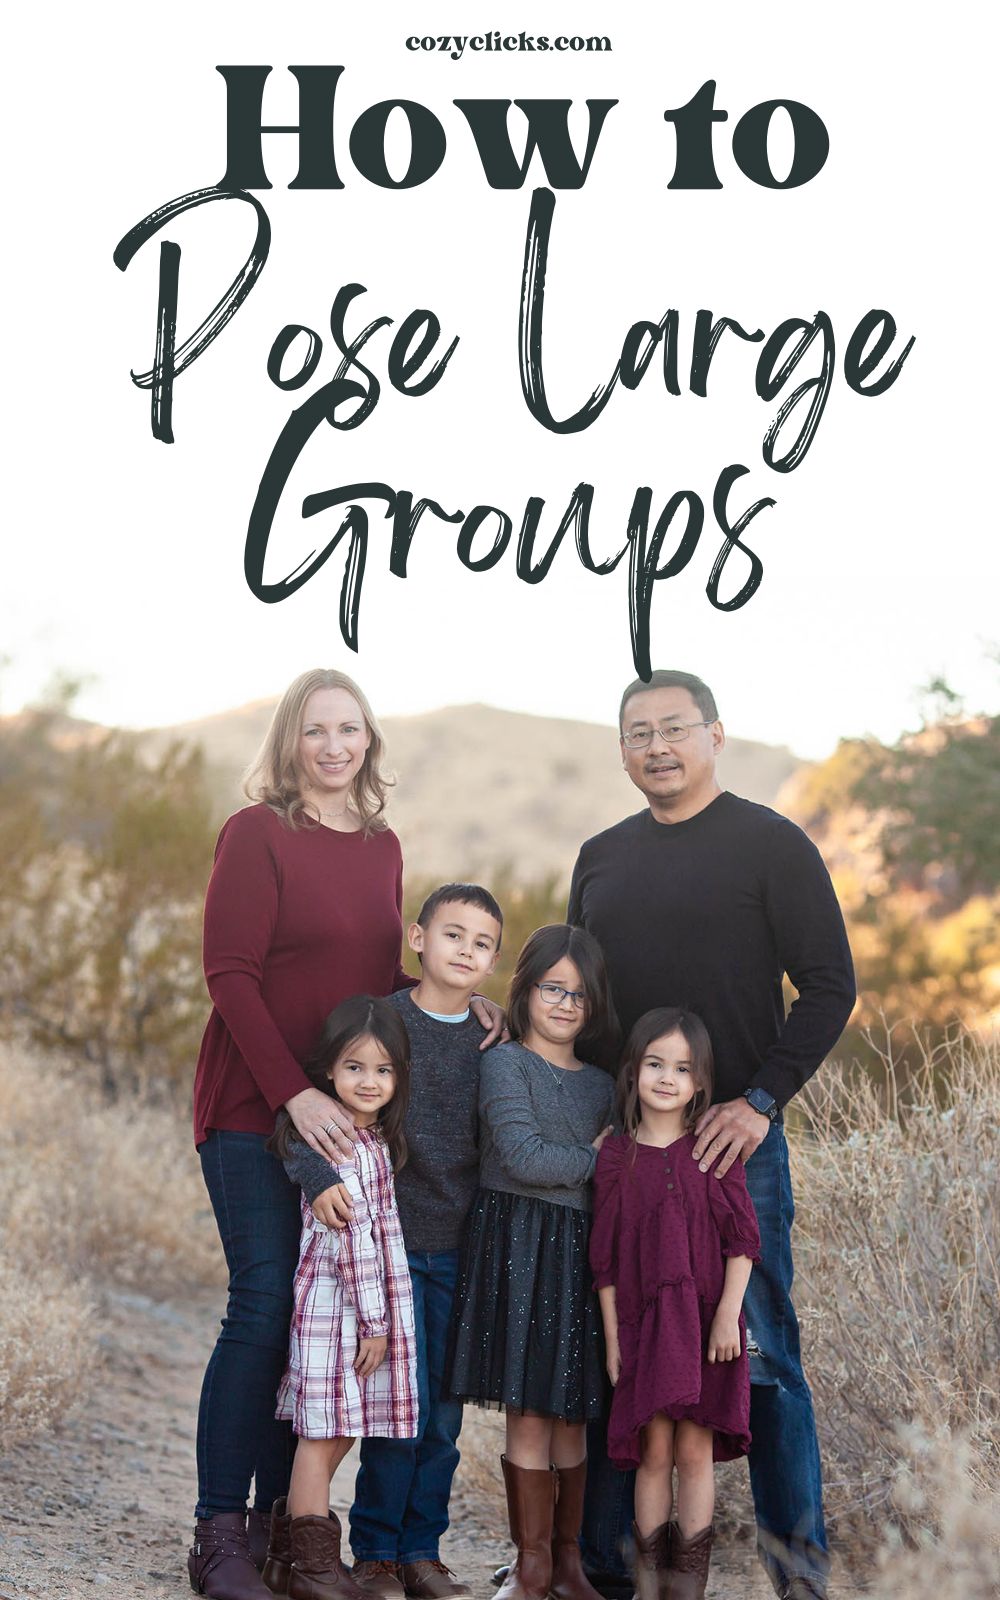 Learn photography tips for posing large groups.  9 easy ways to pose large families when taking pictures!